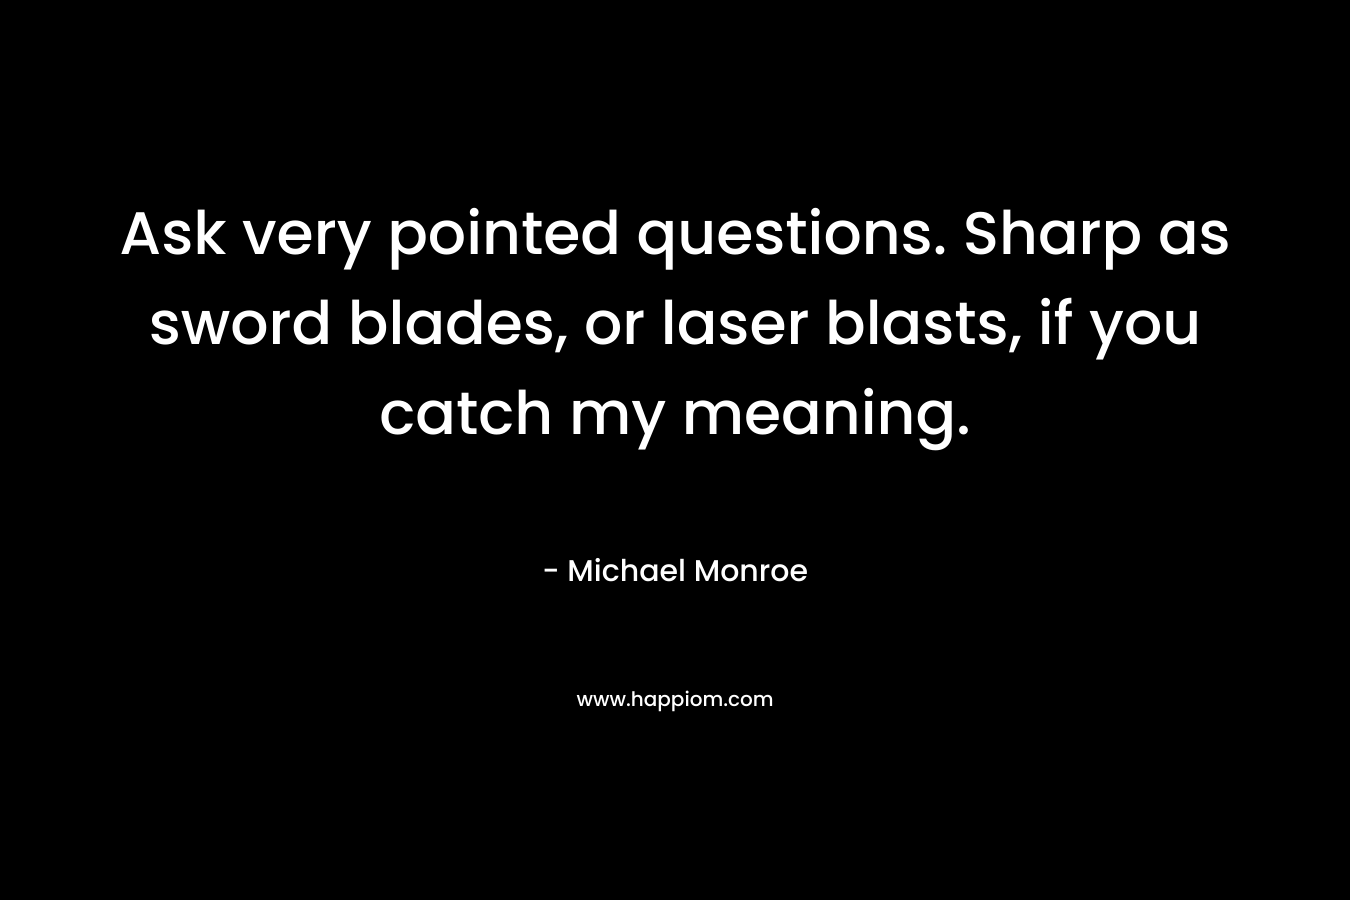 Ask very pointed questions. Sharp as sword blades, or laser blasts, if you catch my meaning.